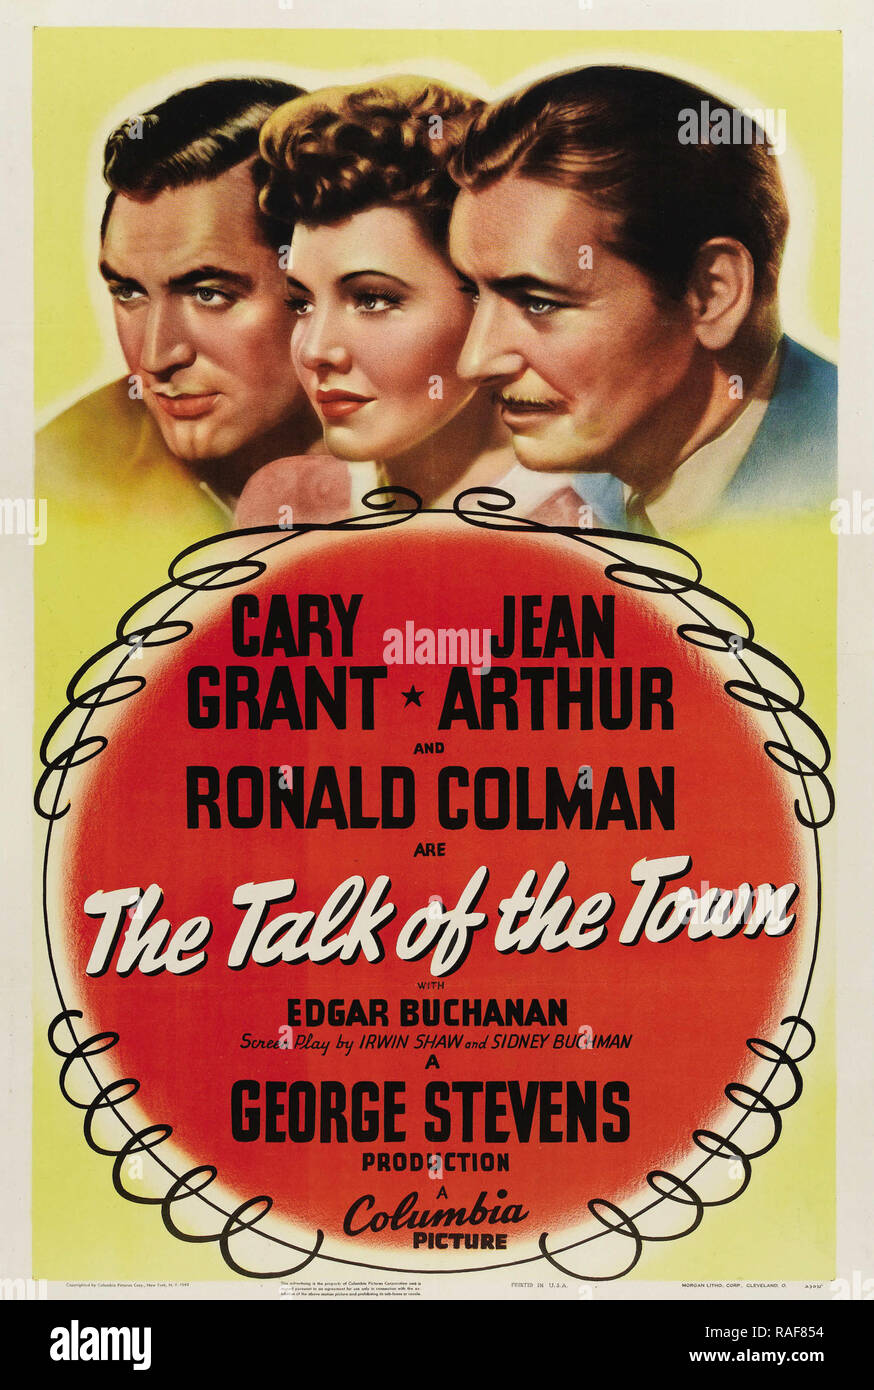 The Talk of the Town (Columbia, 1942), Poster  Cary Grant, Jean Arthur  File Reference # 33636 865THA Stock Photo